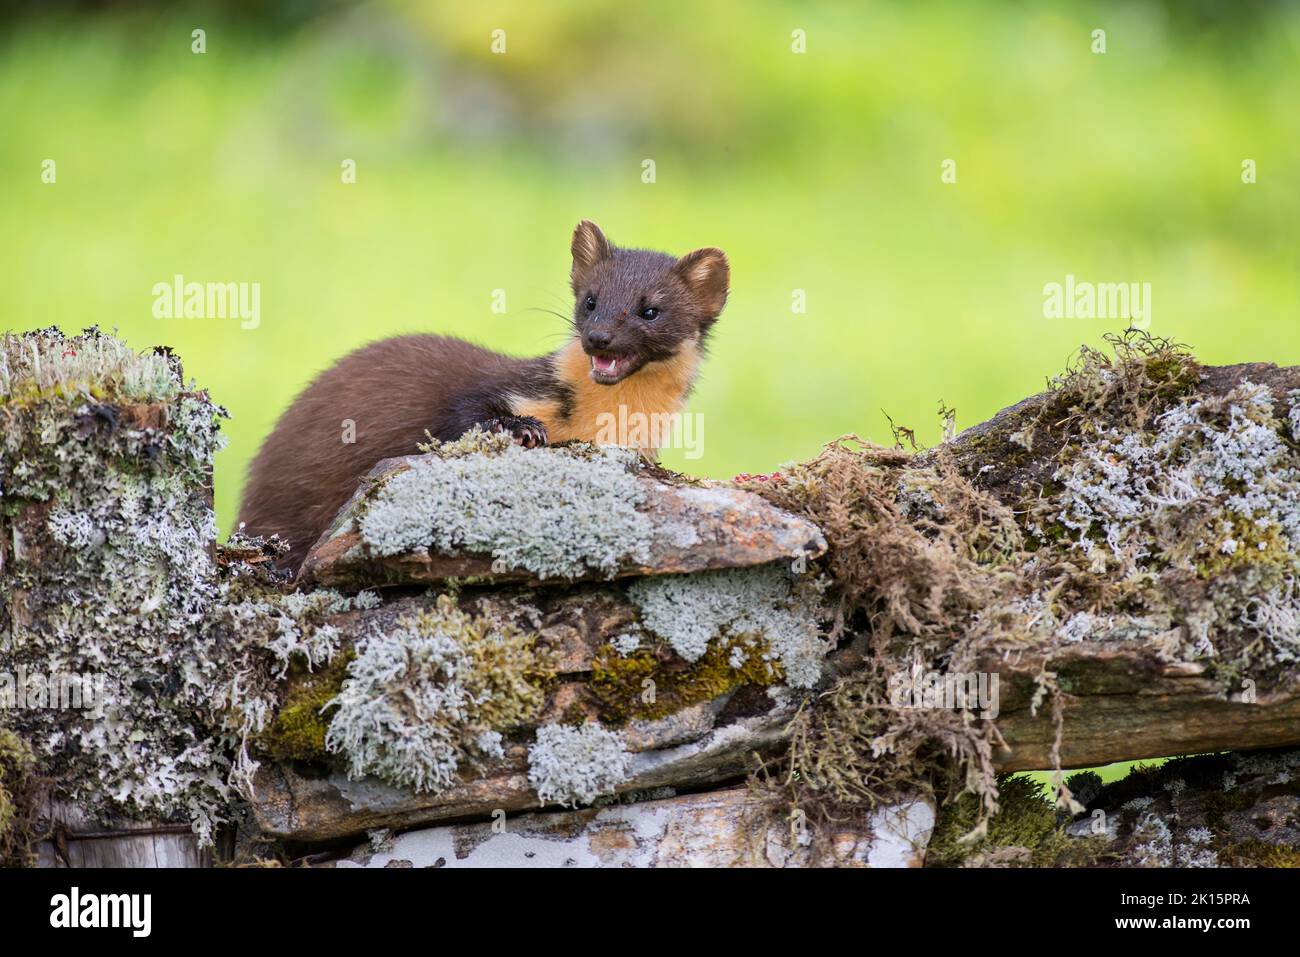 Pine marten (Martes martes) searching for food on a dry stone wall. Stock Photo